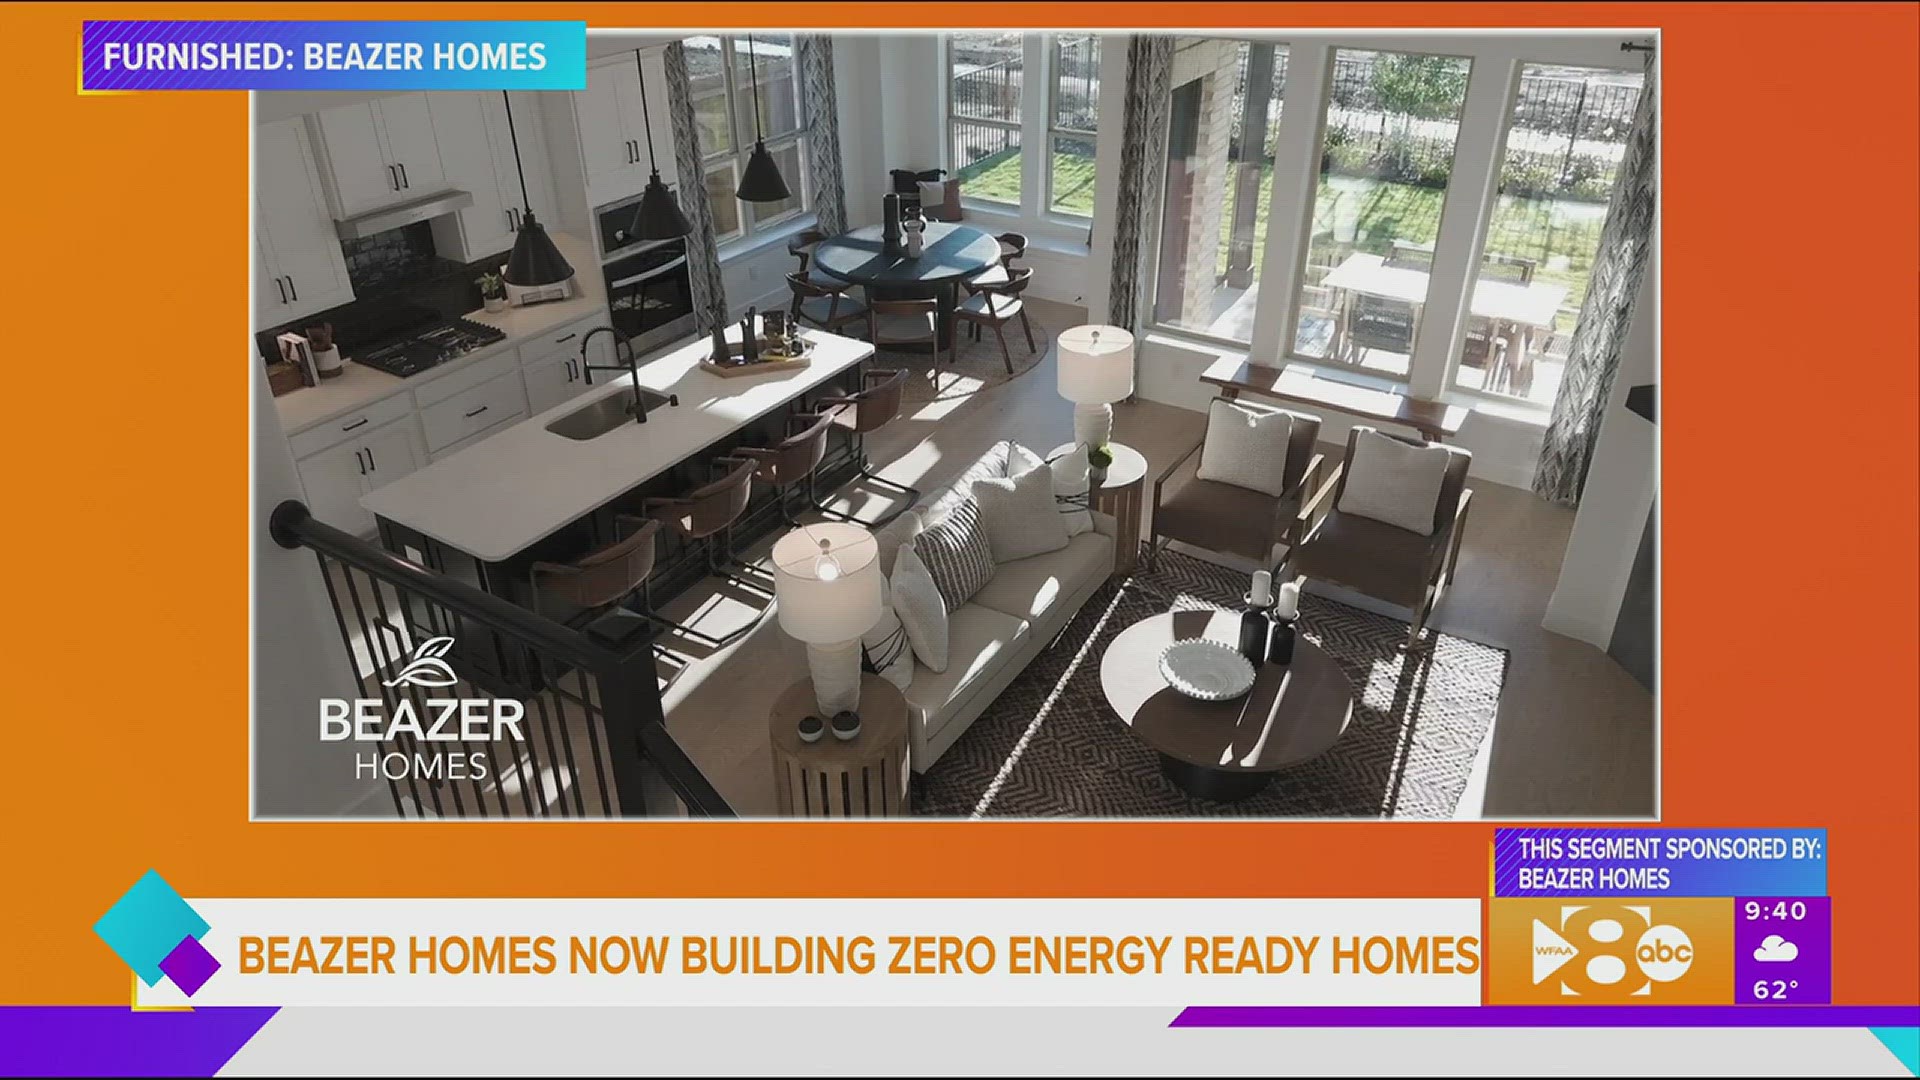 This segment is Sponsored by: Beazer Homes